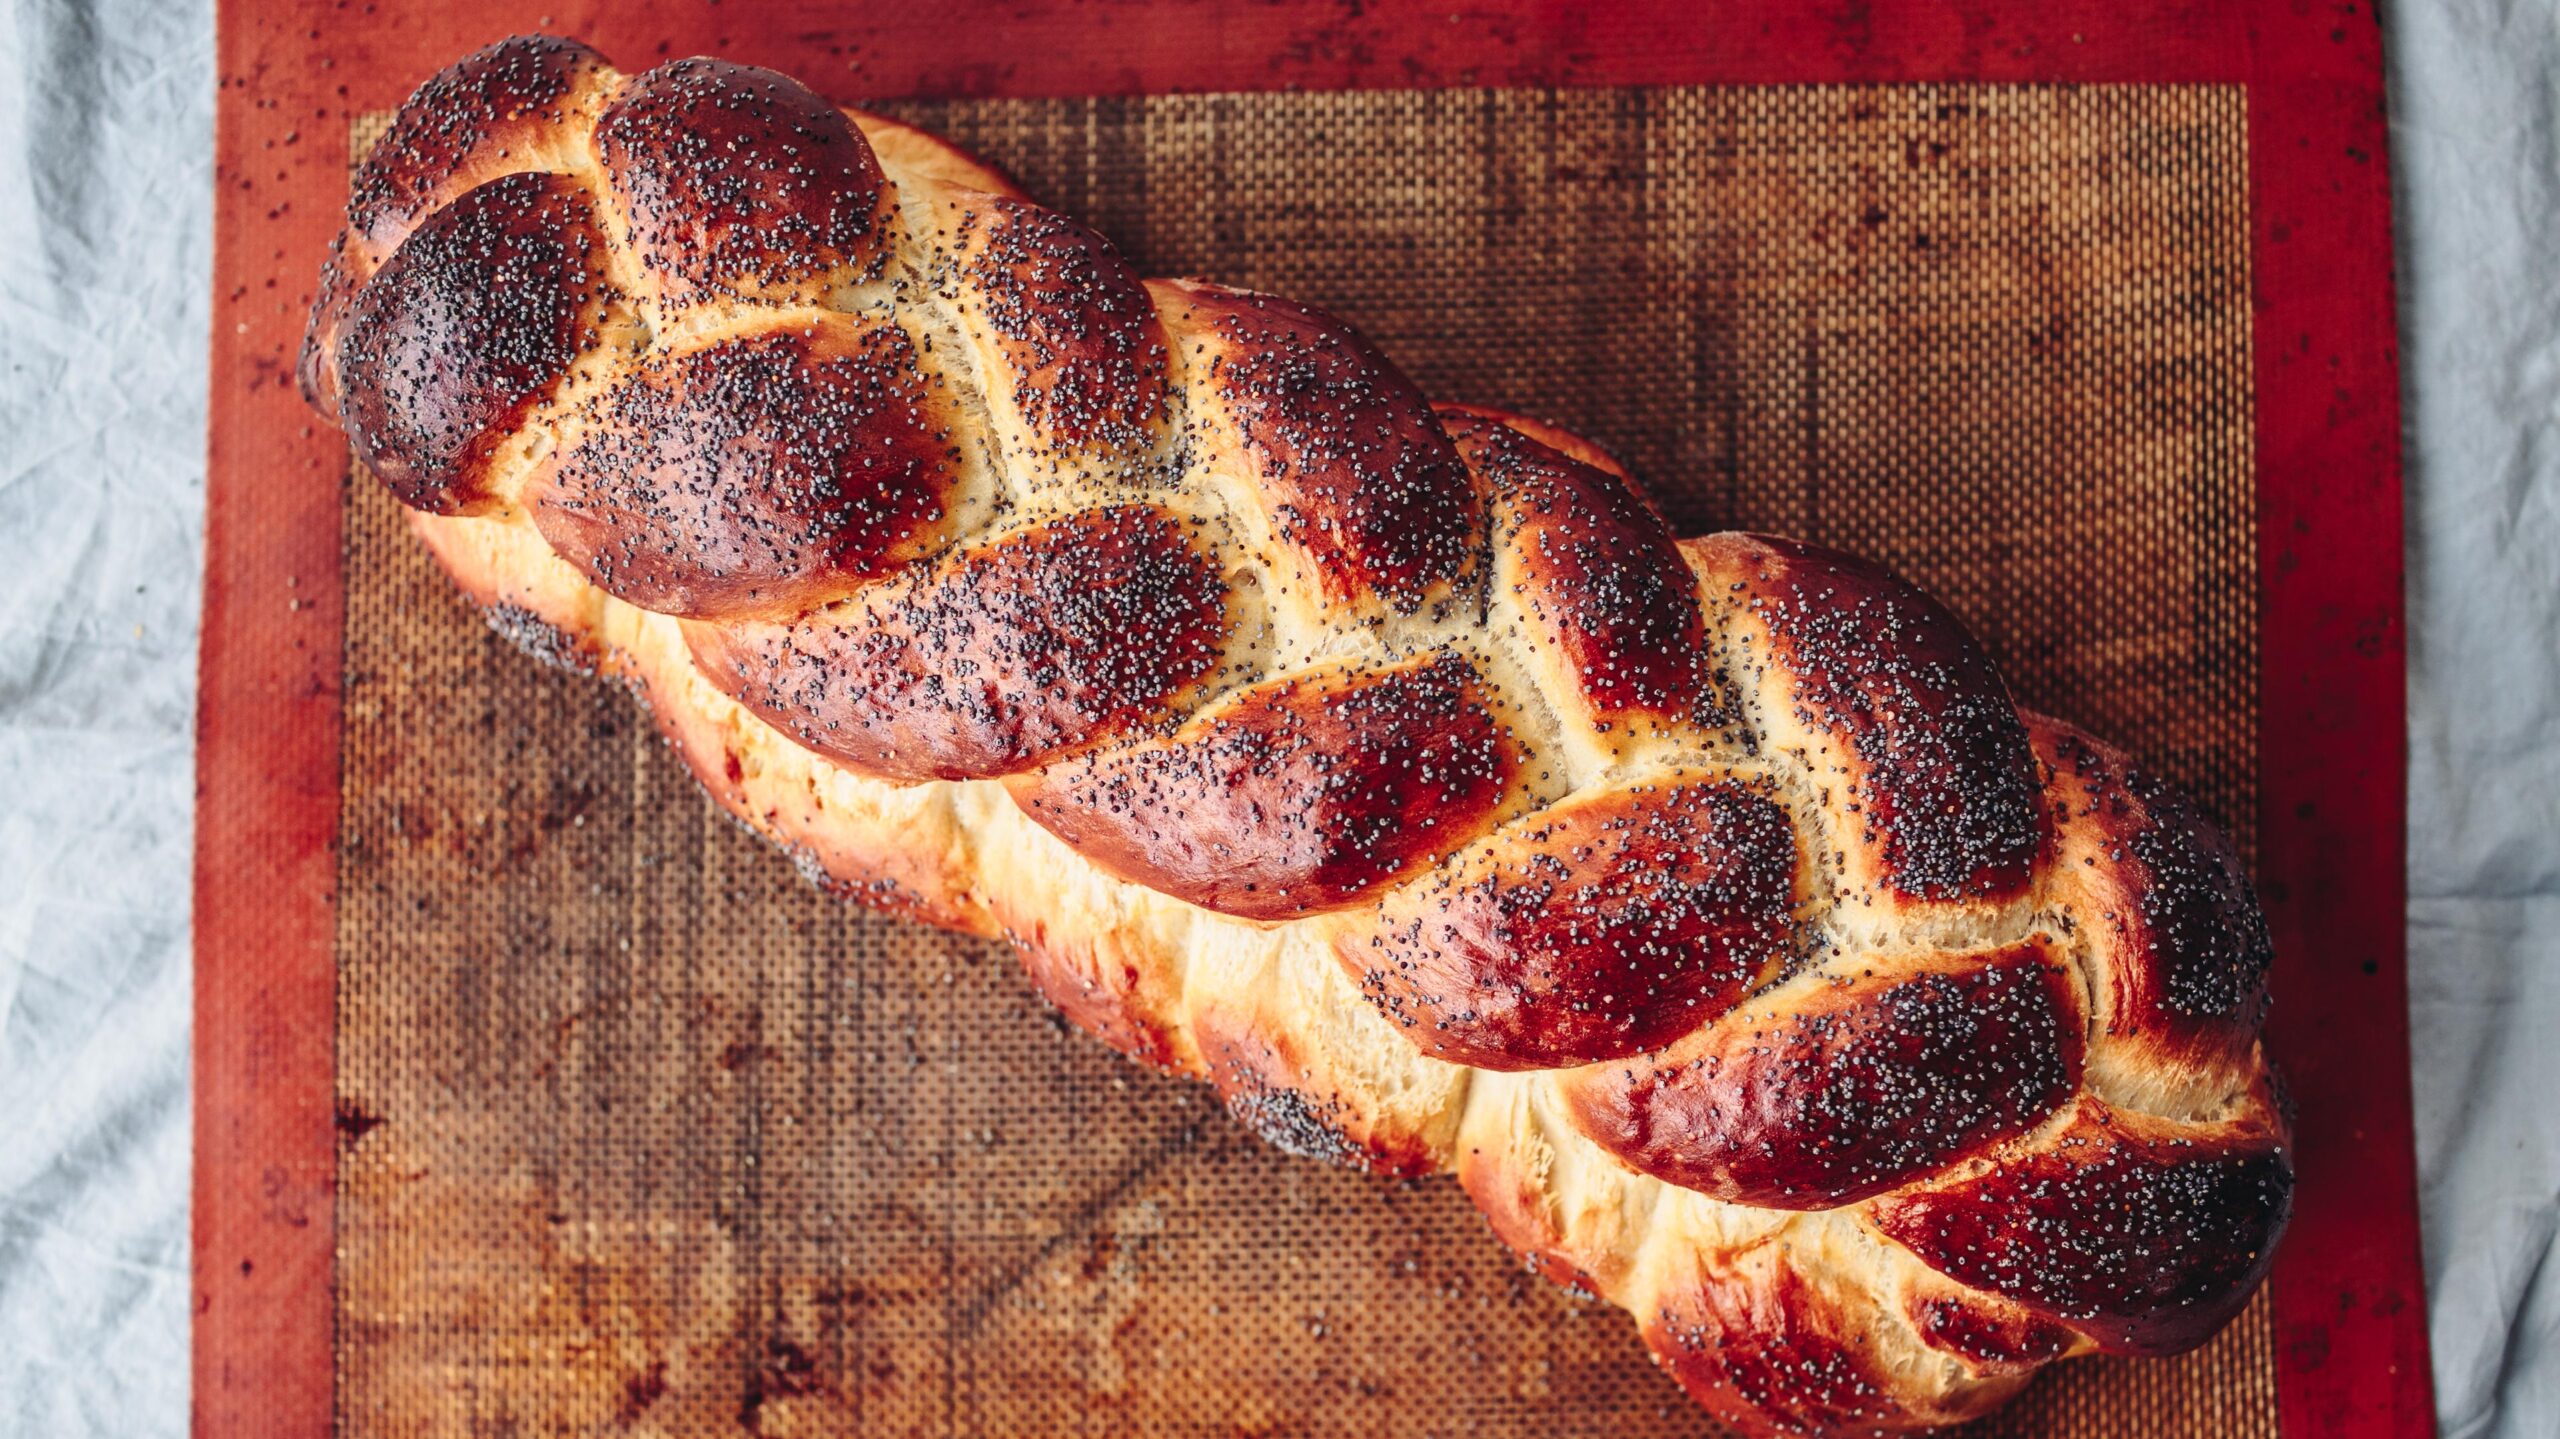  Can you resist the aroma of freshly baked challah?